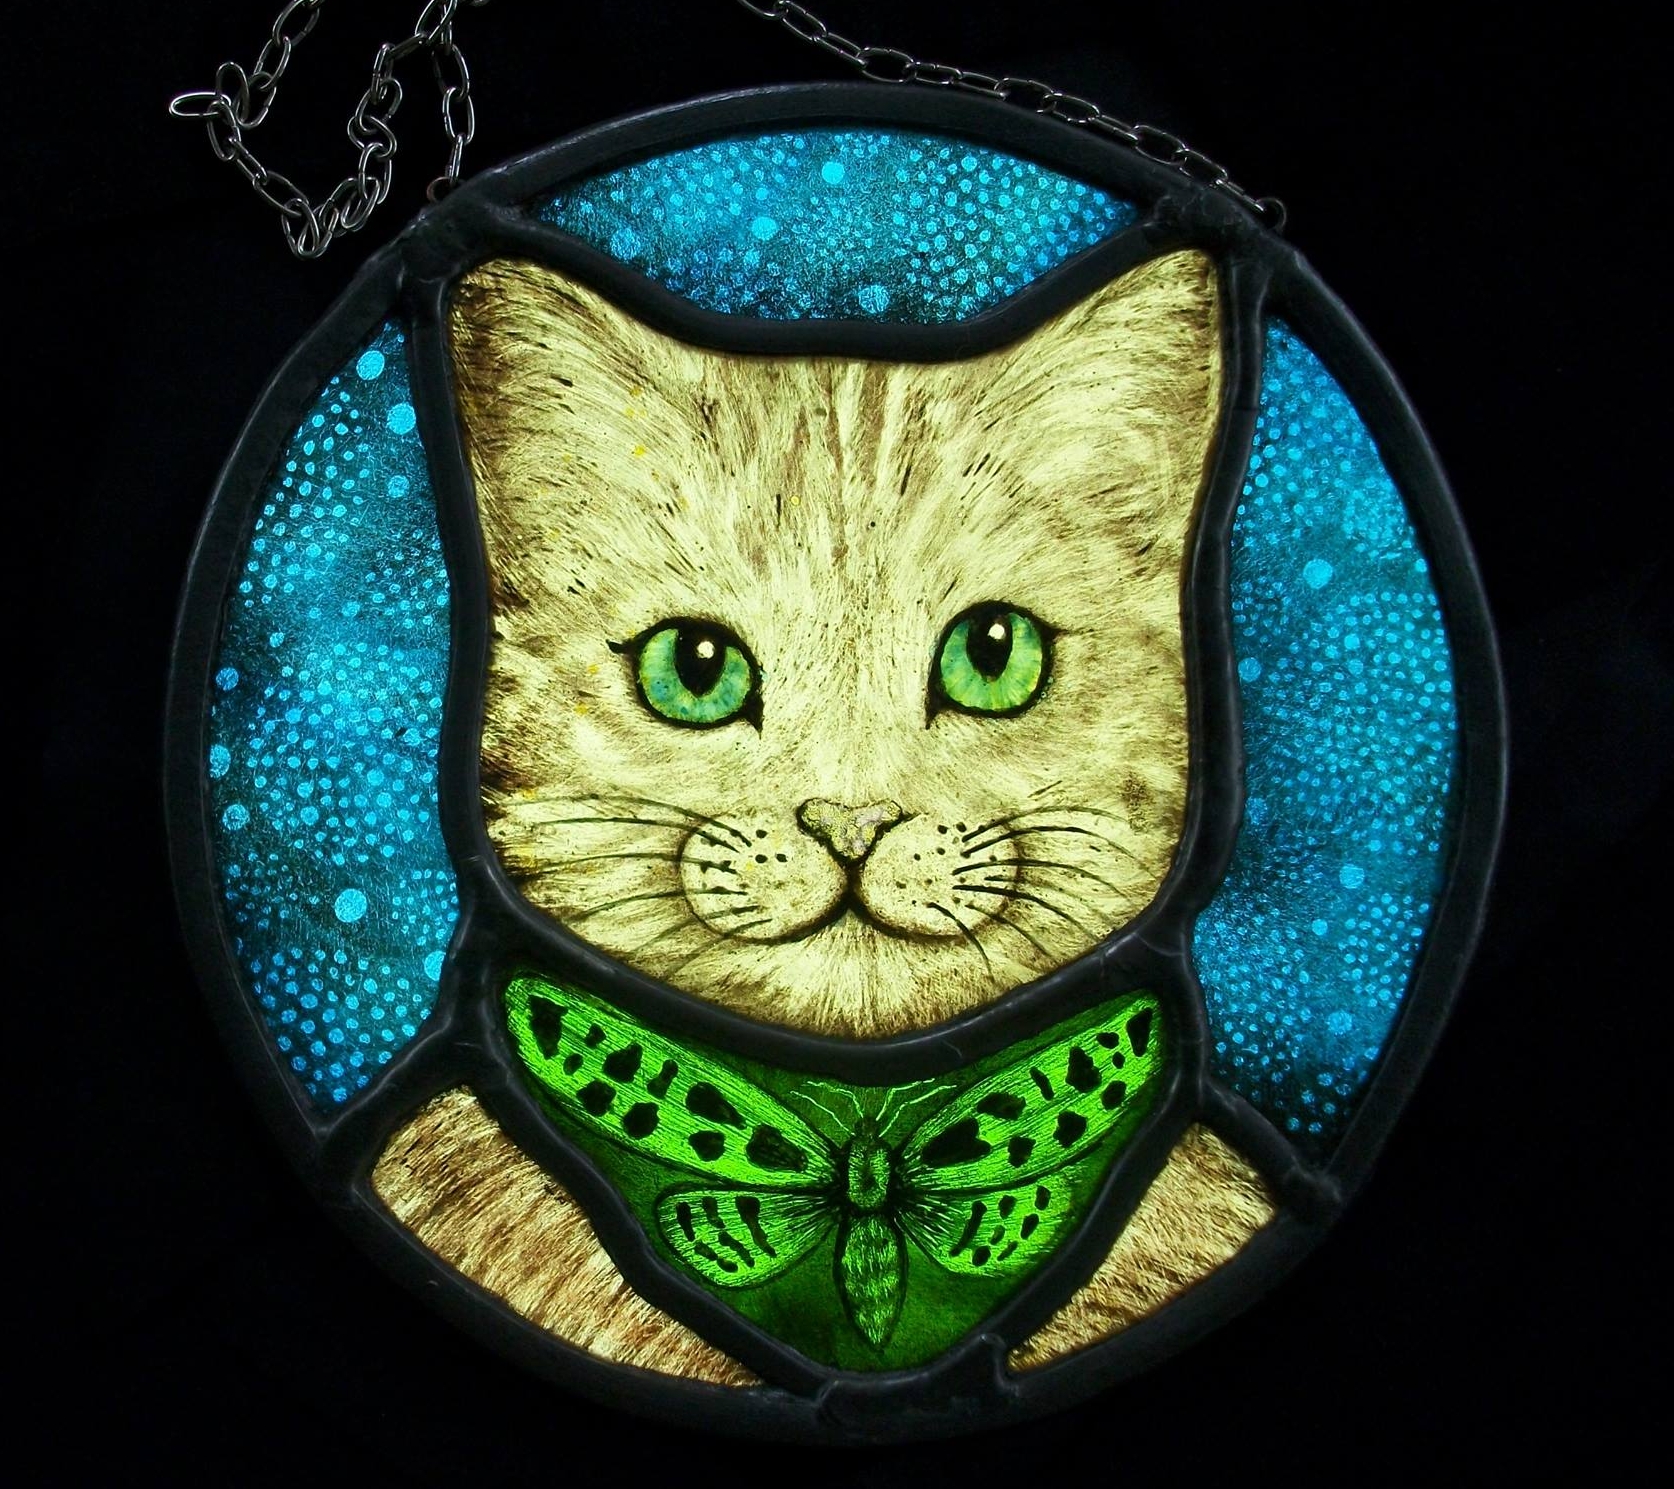 Edmond the Cat on stained glass